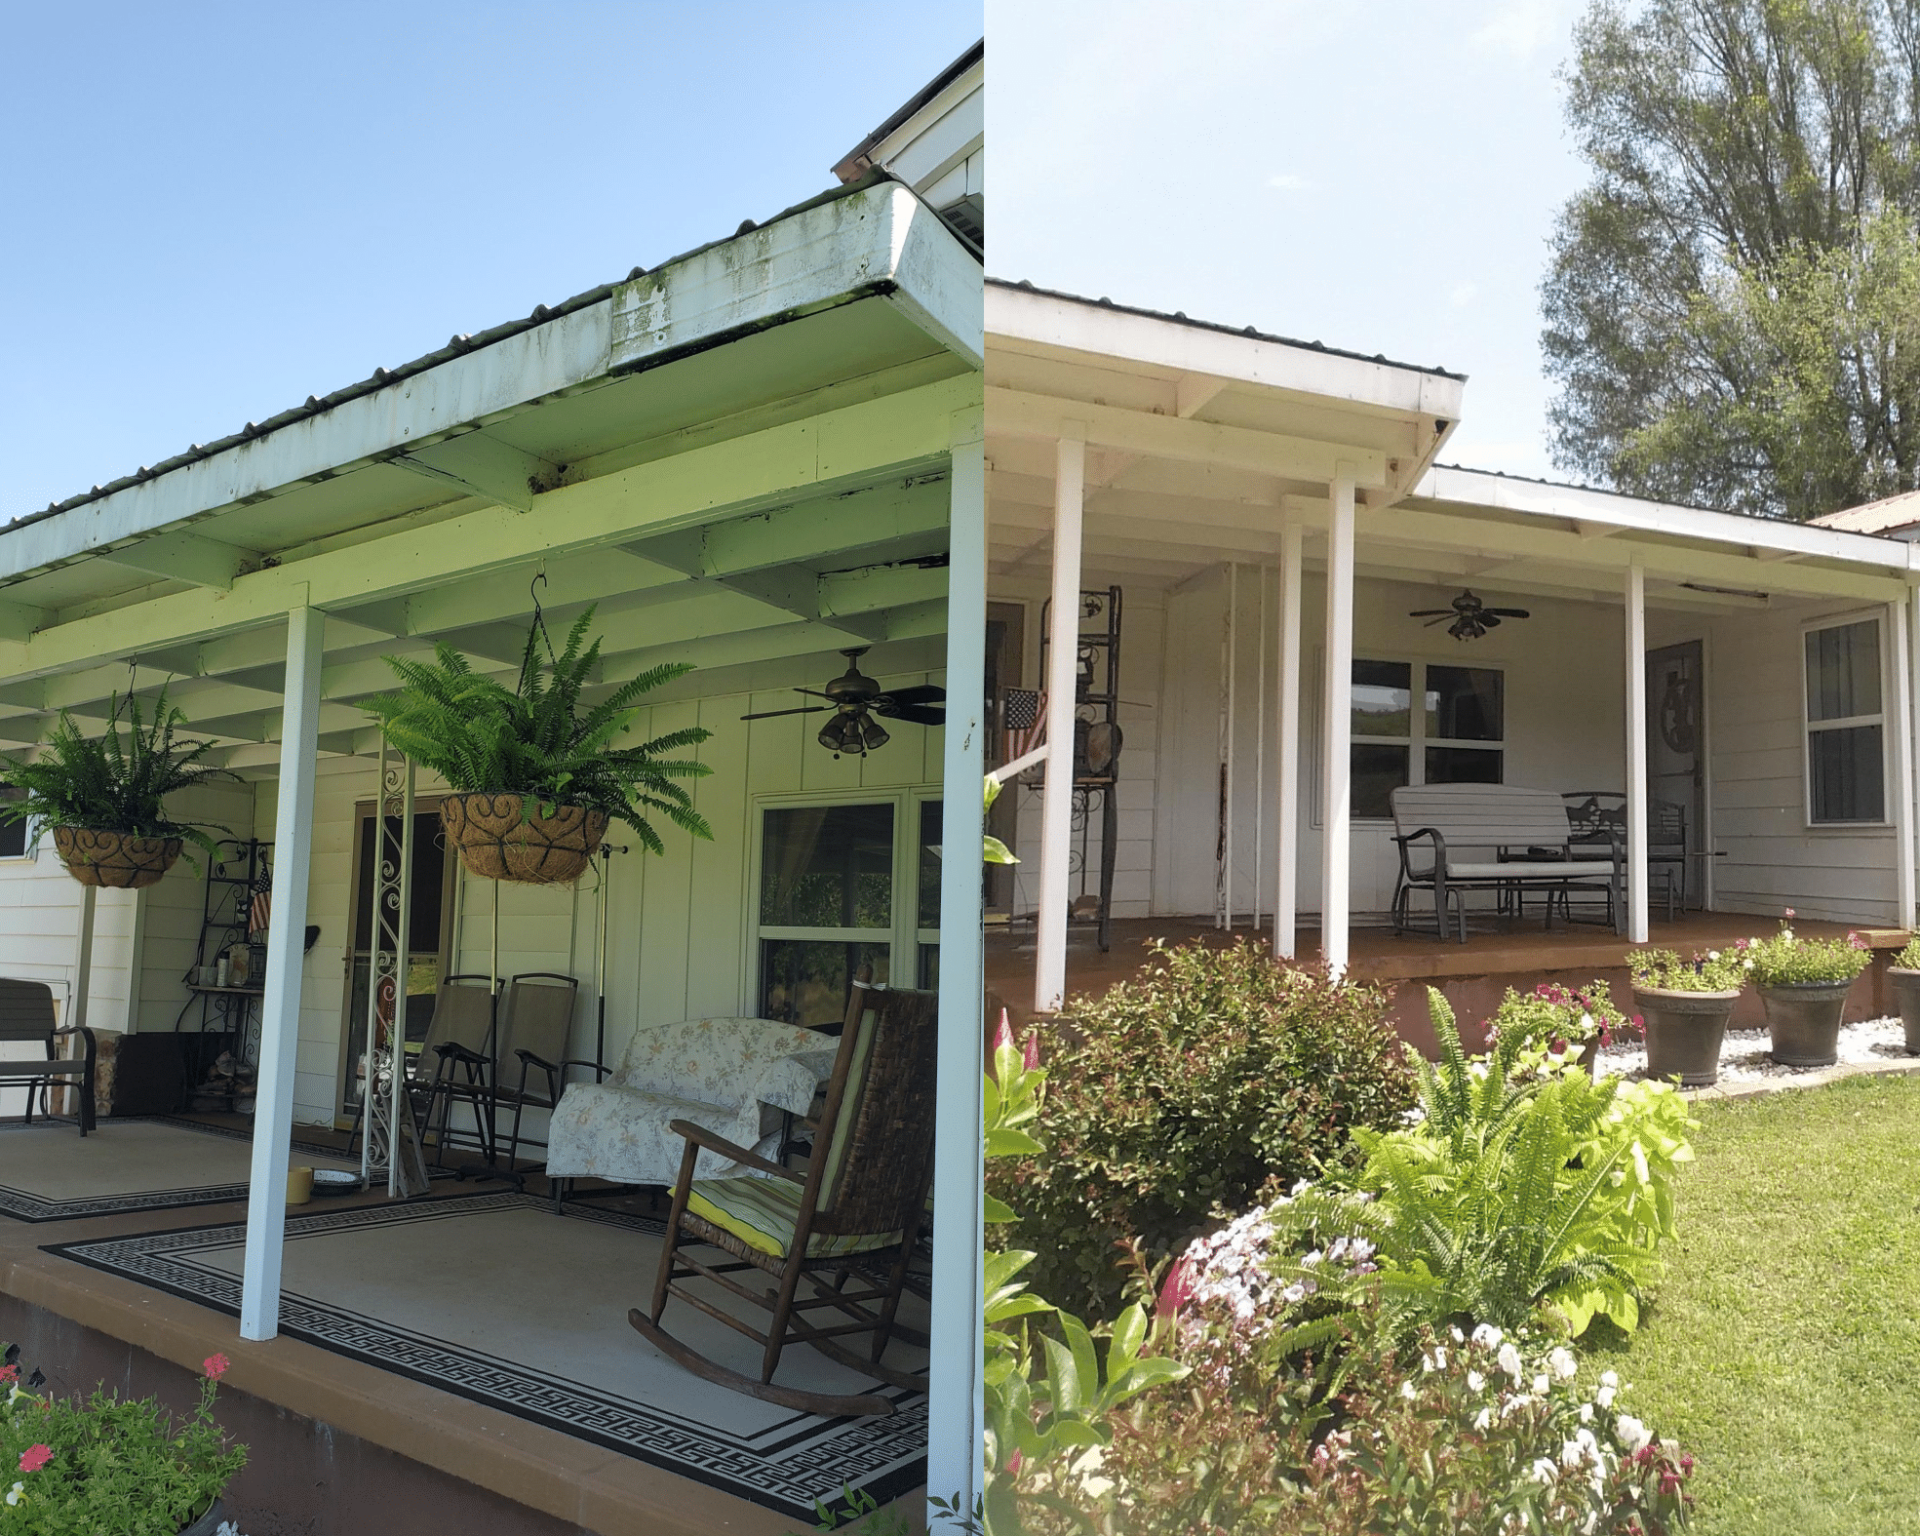 A before and after picture of a porch with rocking chairs